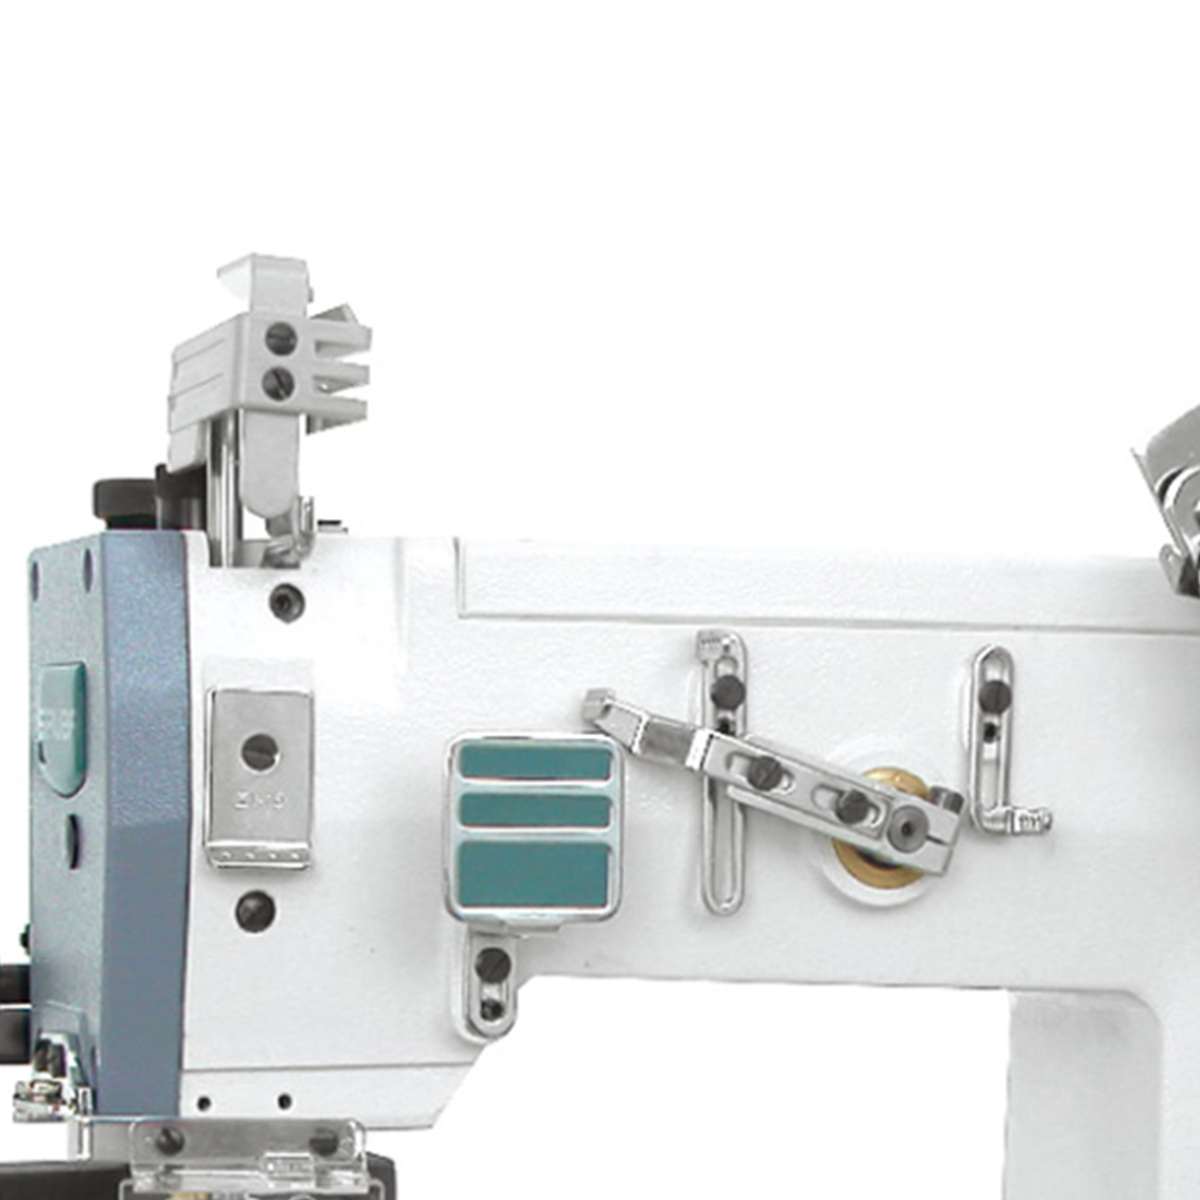 SIRUBA HF008-0464-254P/HPR 4 Needle Chainstitch Industrial Sewing Machine with Table and Stand Included